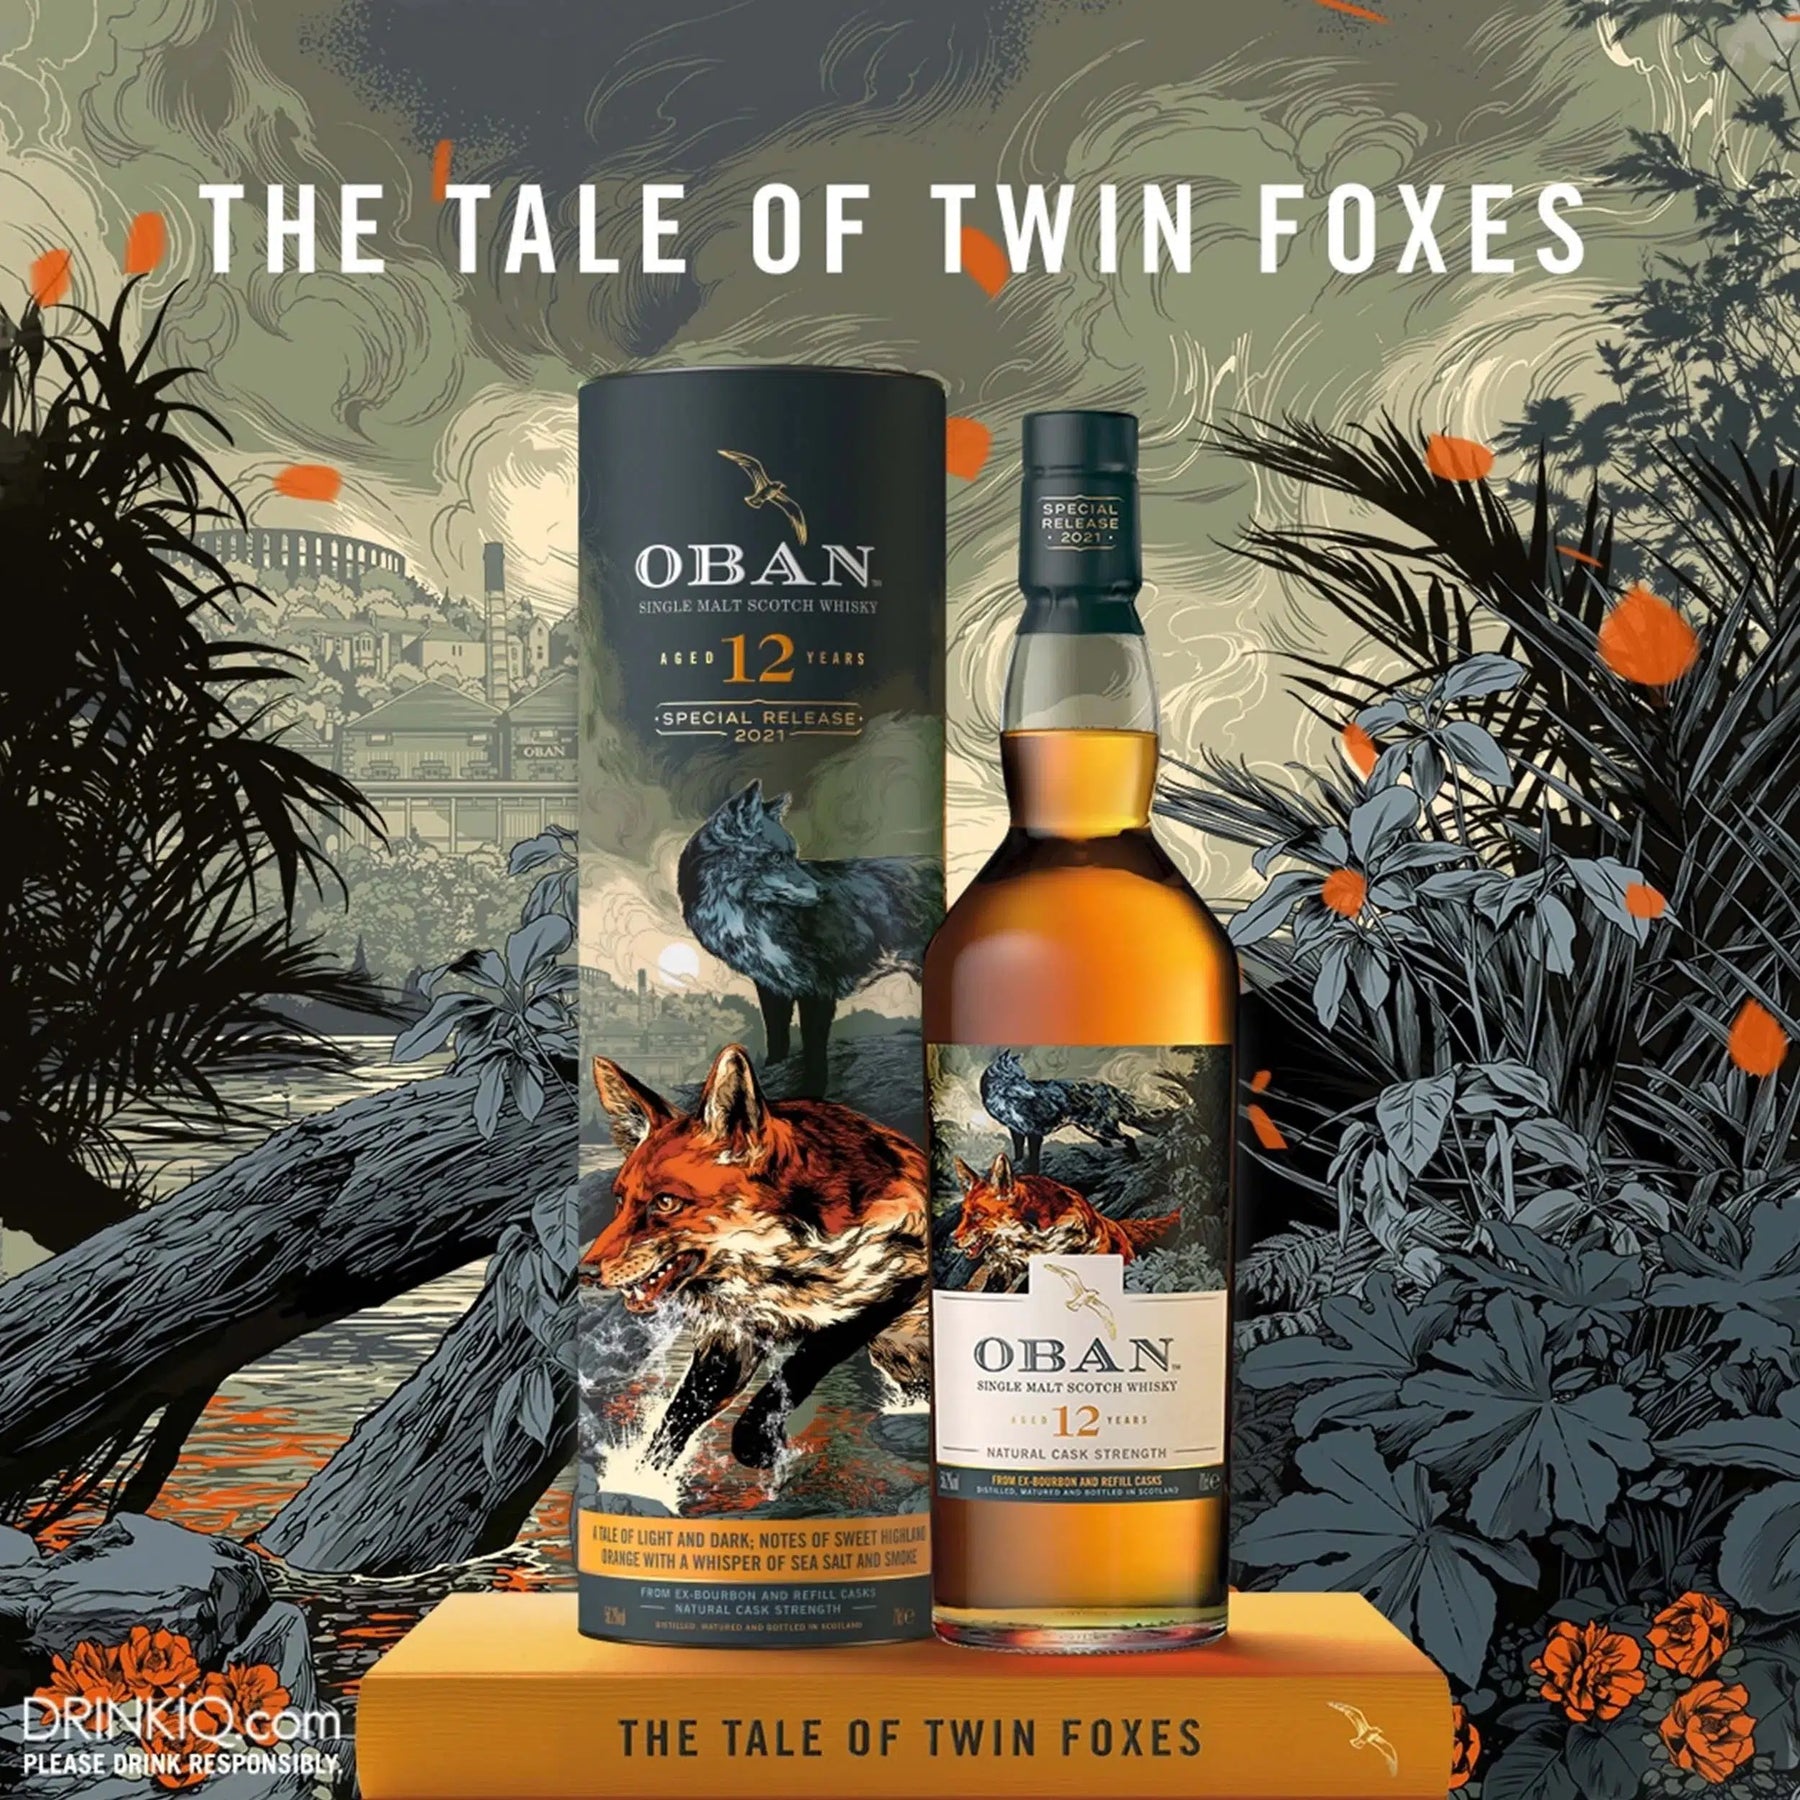 Oban 12 Year Old Special Release 2021 Single Malt Scotch Whisky 700ml